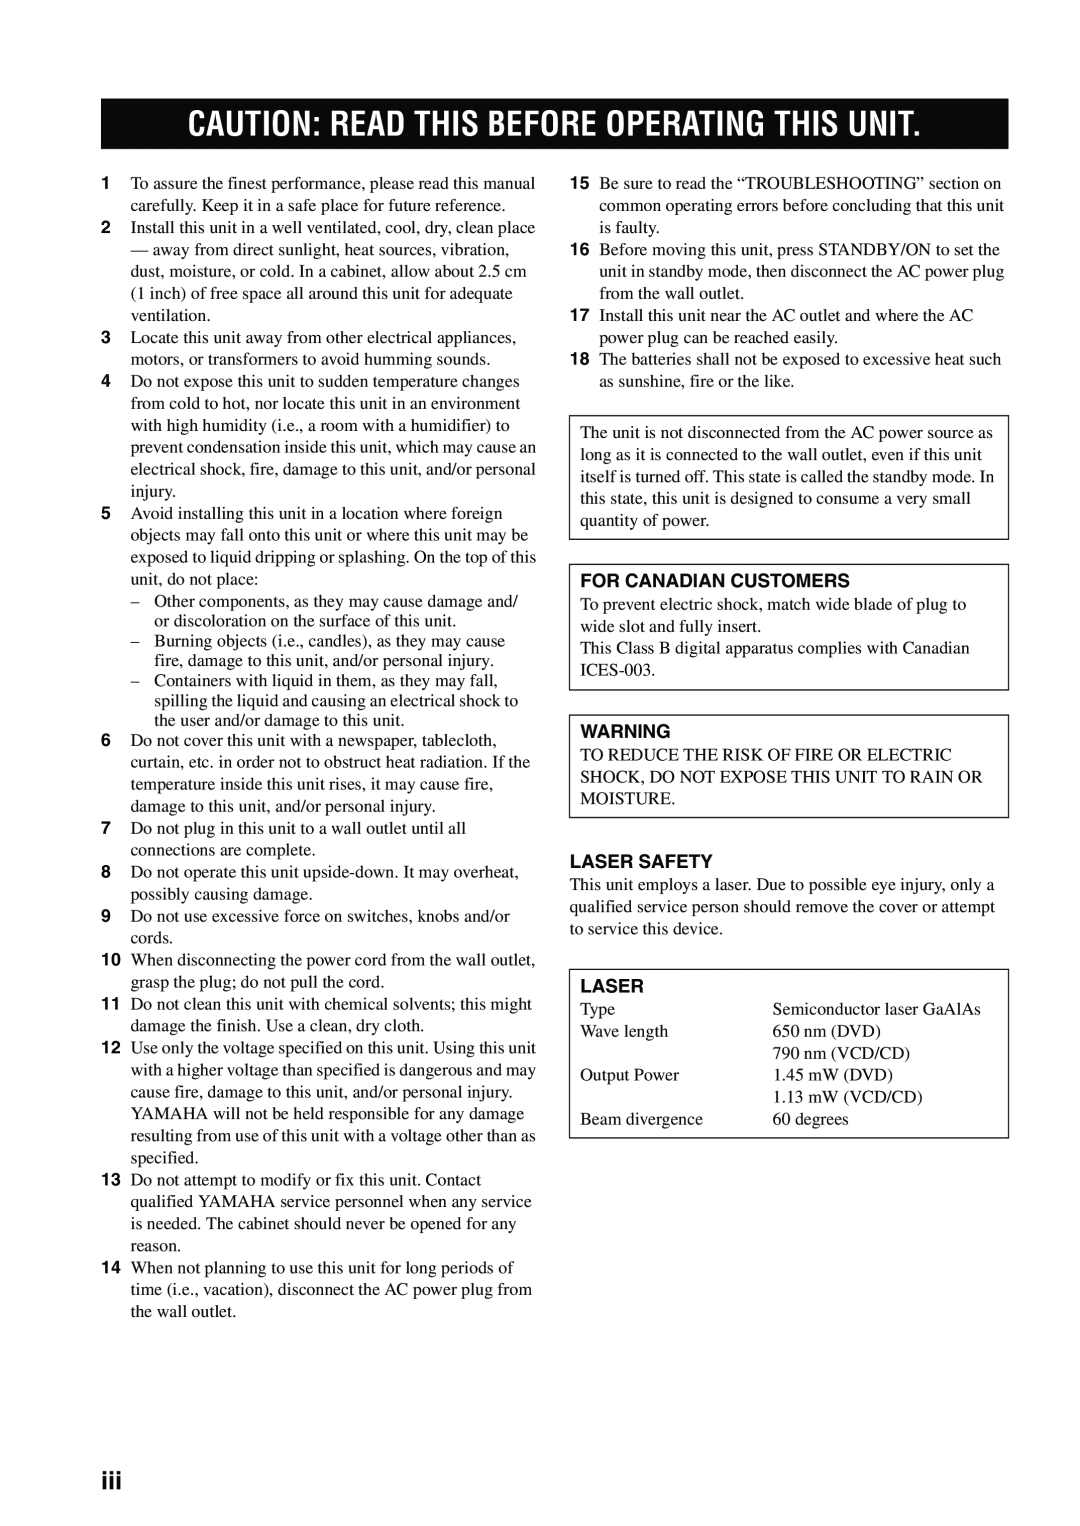 Yamaha DVD-S1700B manual Caution Read This Before Operating This Unit, For Canadian Customers, Laser Safety 